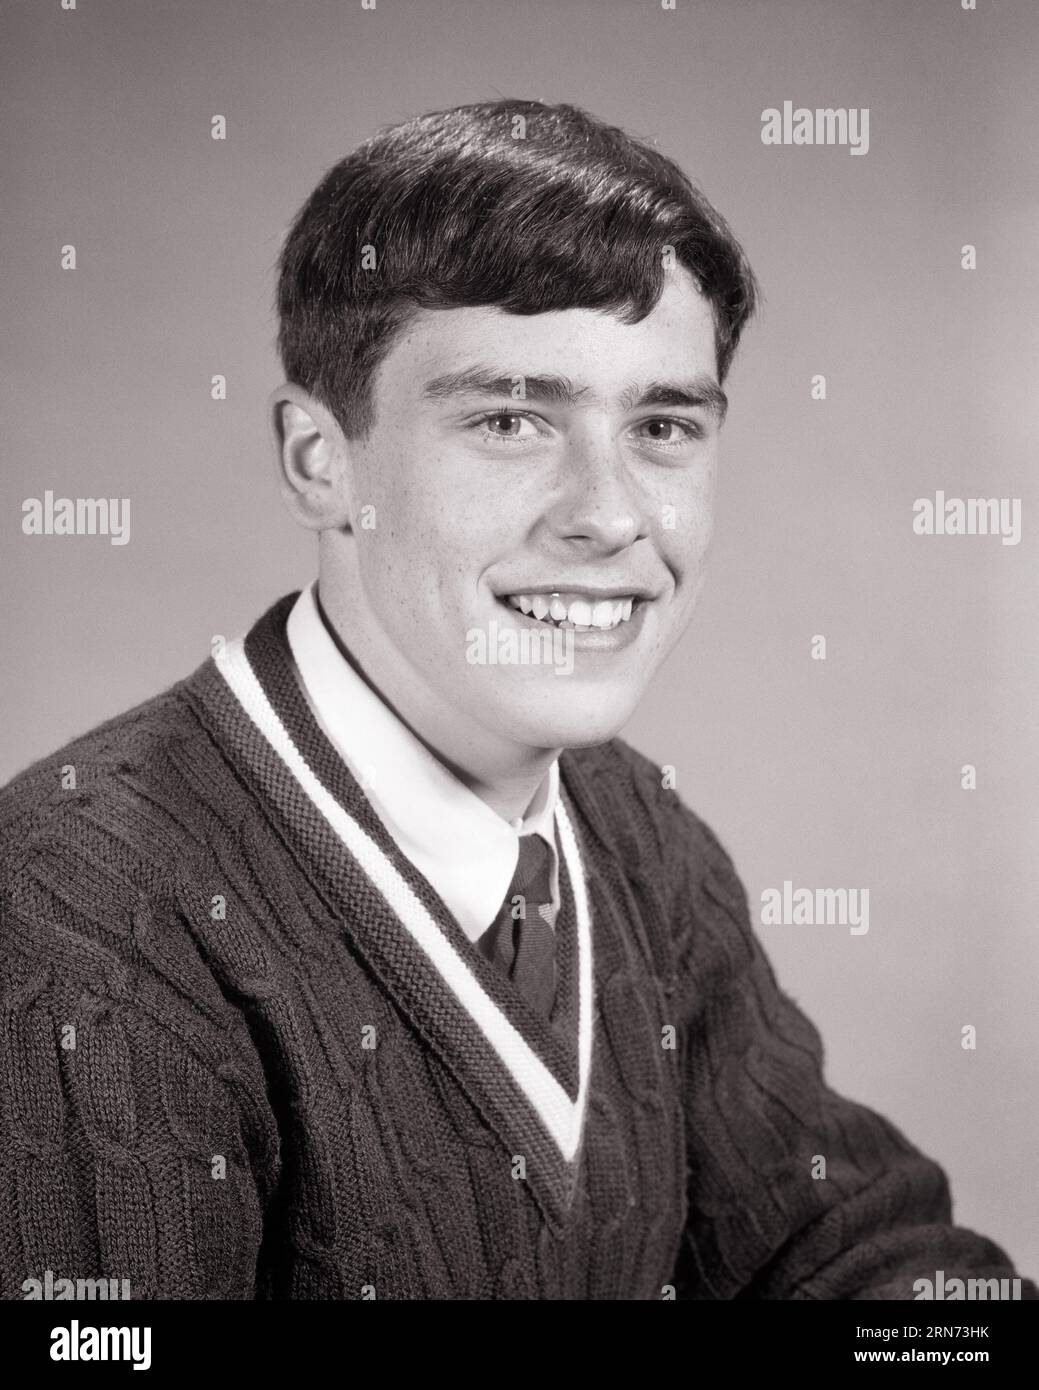 1960s PORTRAIT OF SMILING TEENAGE BOY WEARING VEE NECK SWEATER WITH WHITE SHIRT AND NECK TIE - p7166 HAR001 HARS TEENAGE BOY CONFIDENCE B&W EYE CONTACT BRUNETTE SCHOOLS HAPPINESS HEAD AND SHOULDERS CHEERFUL AND PRIDE HIGH SCHOOL SMILES HIGH SCHOOLS JOYFUL STYLISH TEENAGED JUVENILES VEE BLACK AND WHITE CAUCASIAN ETHNICITY HAR001 OLD FASHIONED Stock Photo